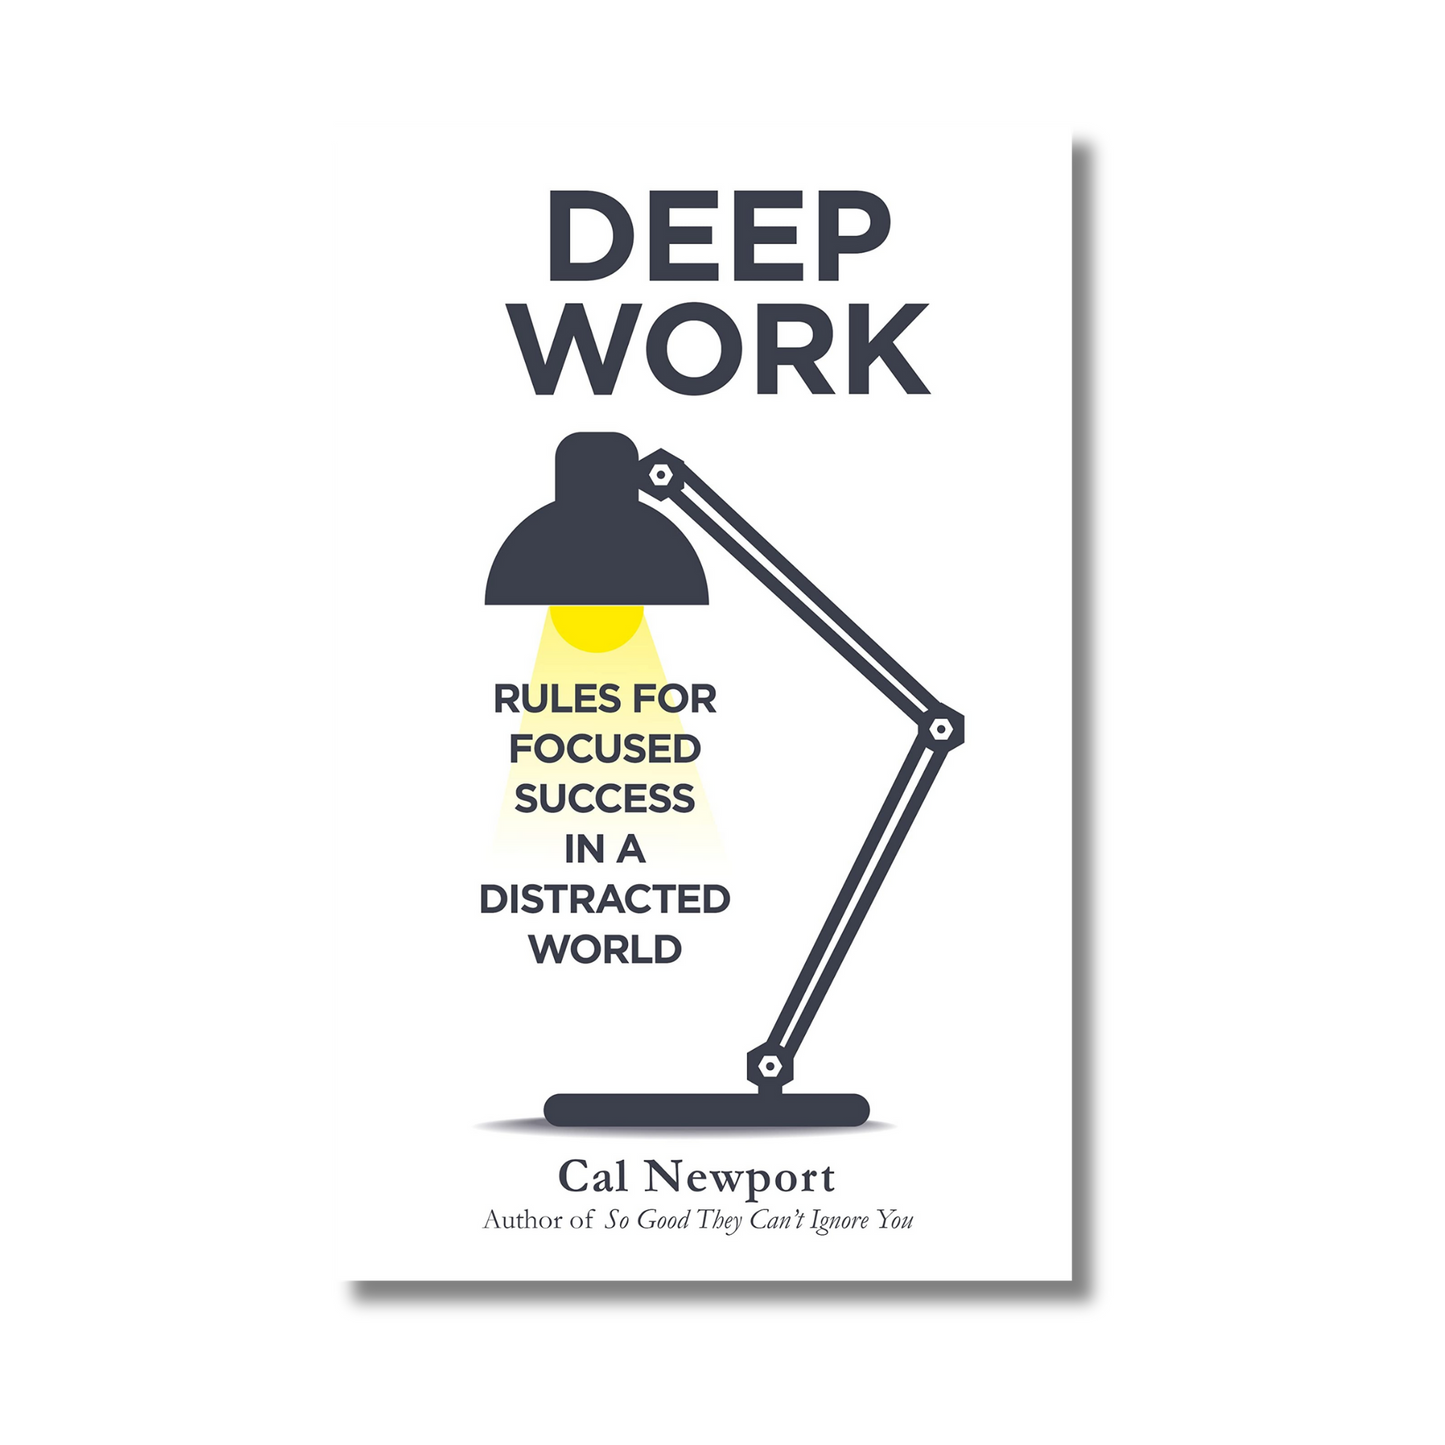 DEEP WORK by Cal Newport's: RULES FOR FOCUSED SUCCESS IN A DISTRACTED WORLD (Paperback)